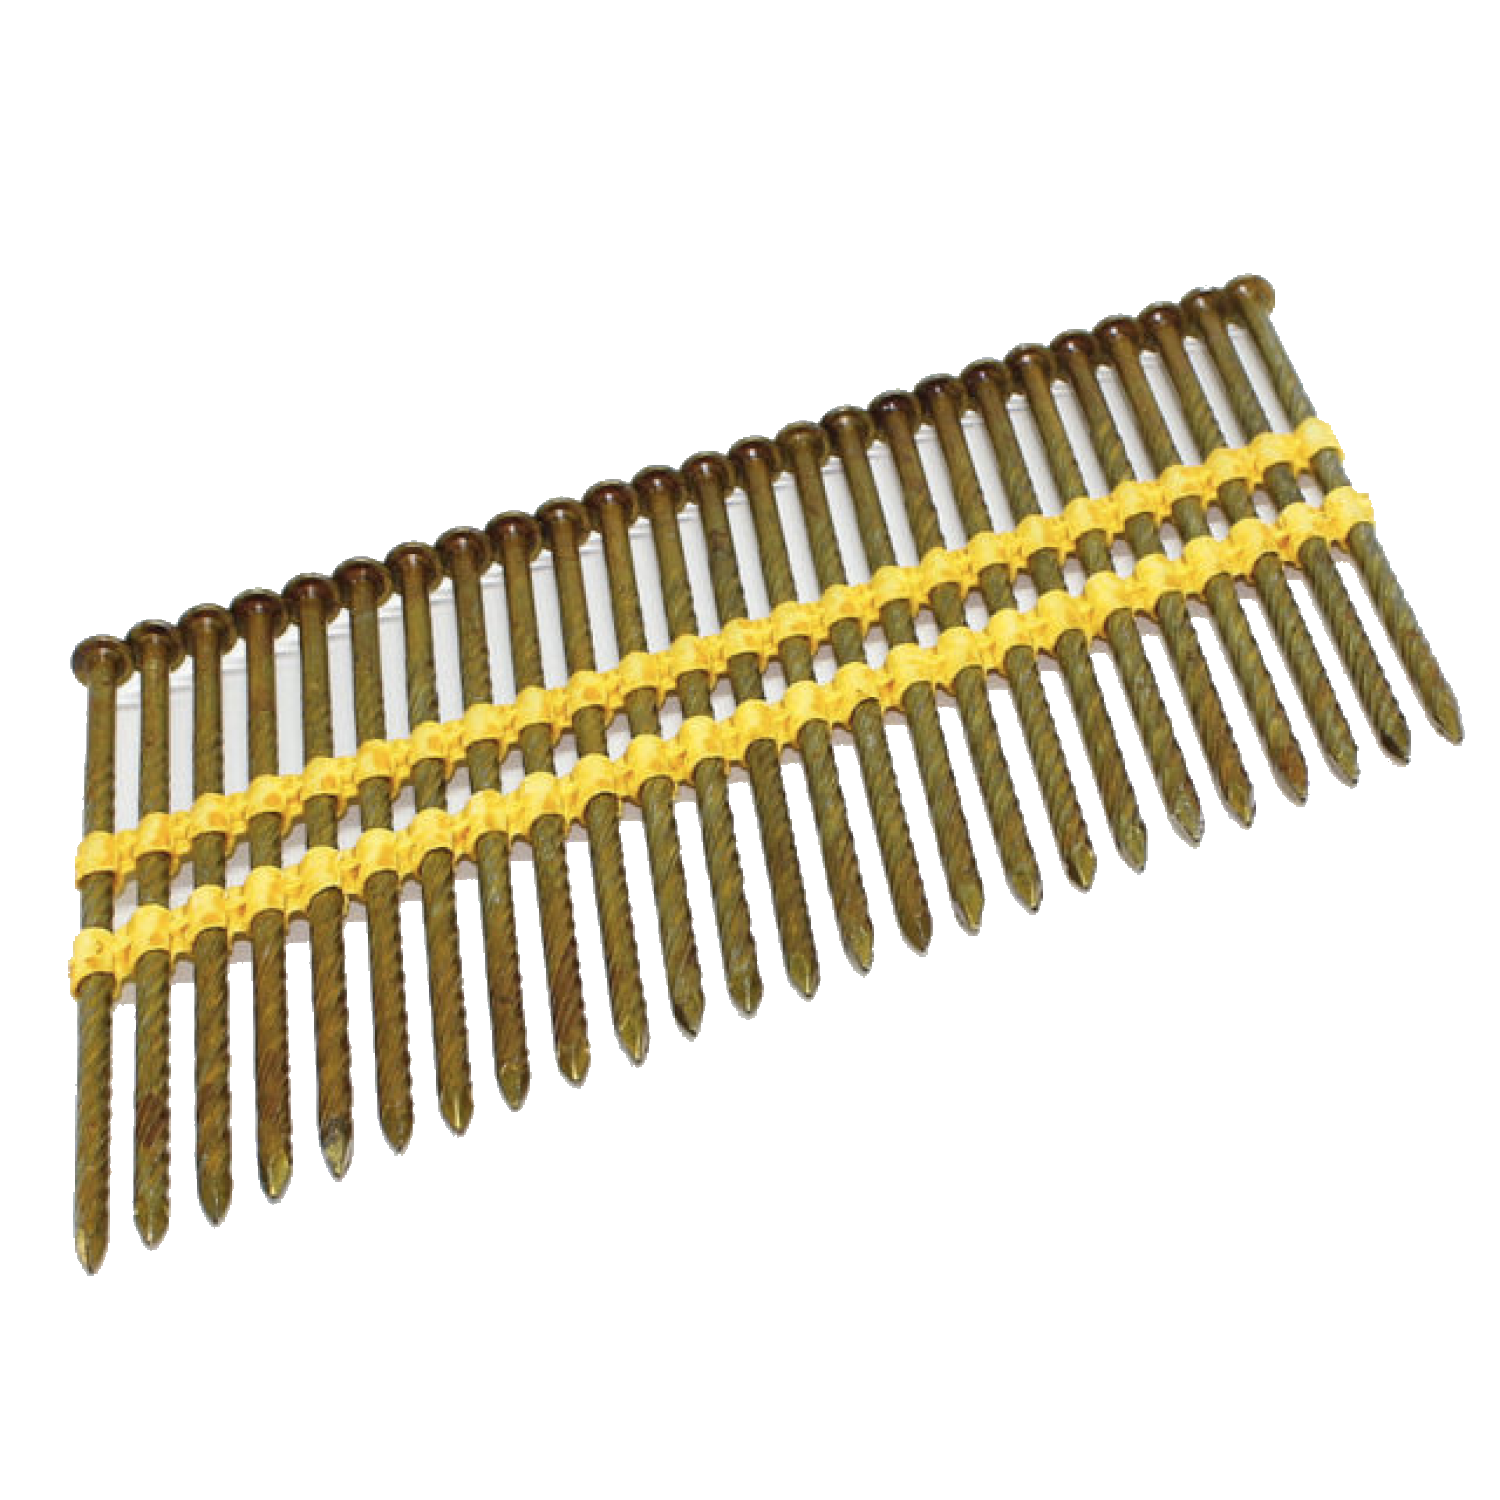 3 1 X 90mm Screw Galv 21 Degree Plastic Collated Framing Nails 3000 Per